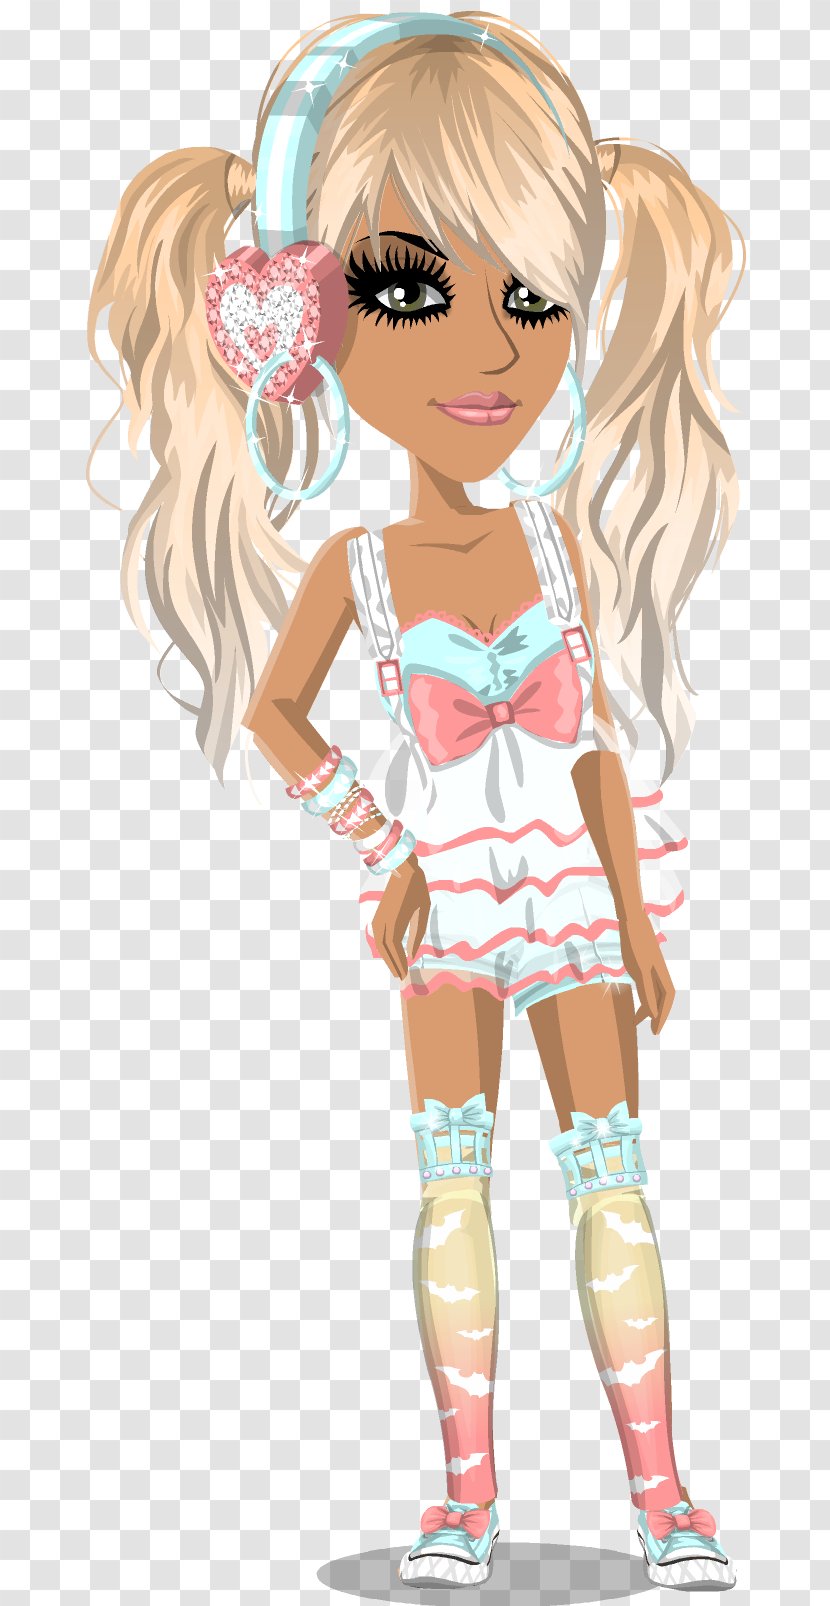 MovieStarPlanet YouTube Nerd Fashion Game - Flower - Carnival Outfits Transparent PNG